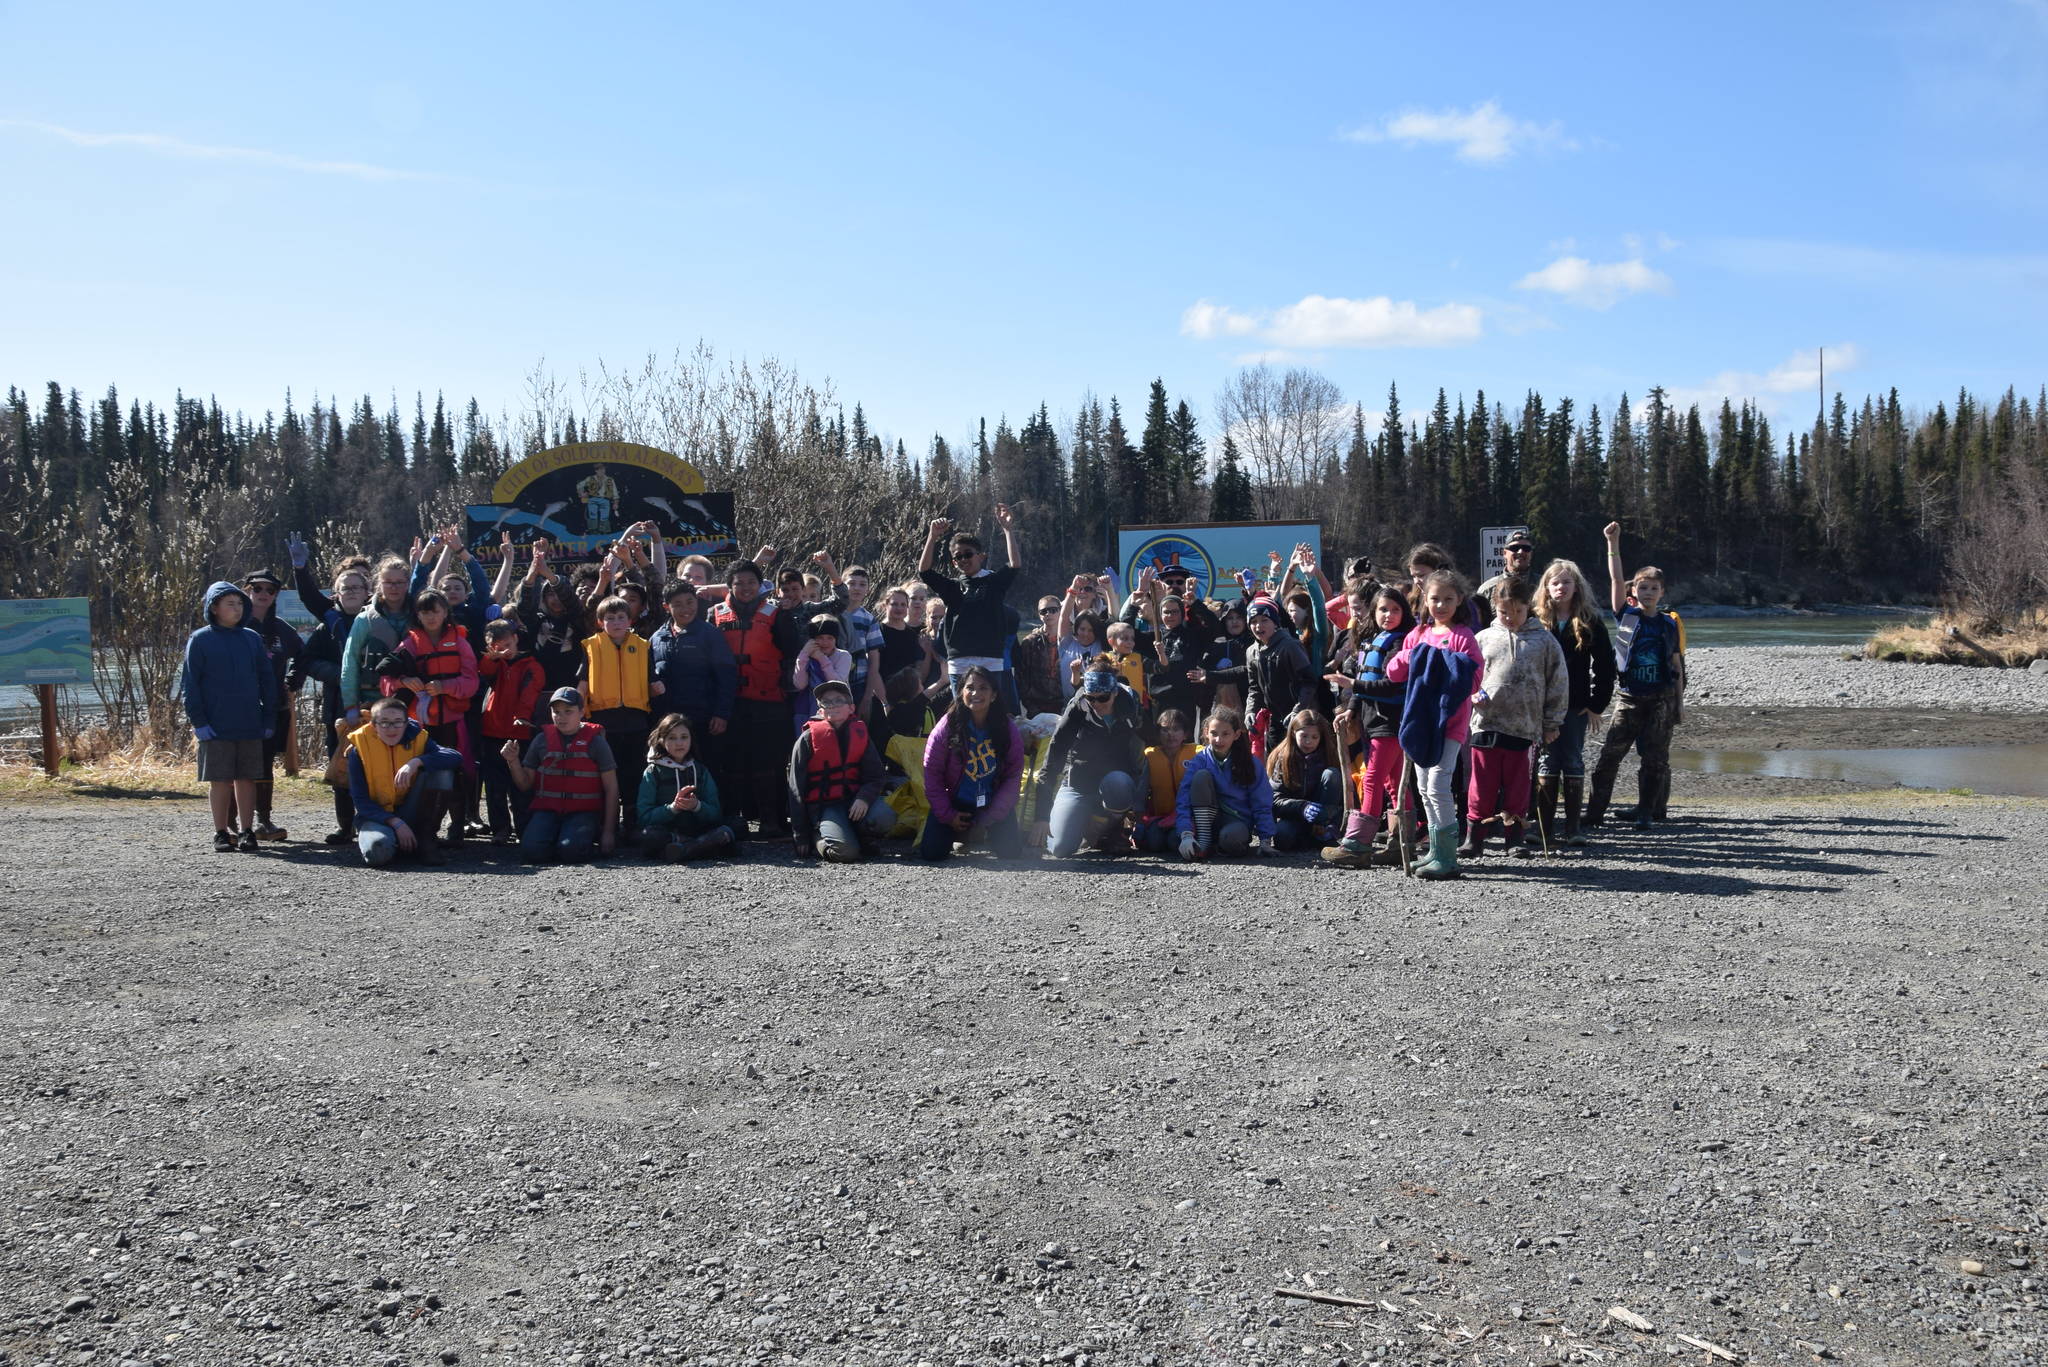 Students from Redoubt Elementary pose for a group photo during the 6th Annual Kids Kenai River Spring Cleanup at Swiftwater Park in Soldotna, Alaska on May 3, 2019. (Photo by Brian Mazurek/Peninsula Clarion)